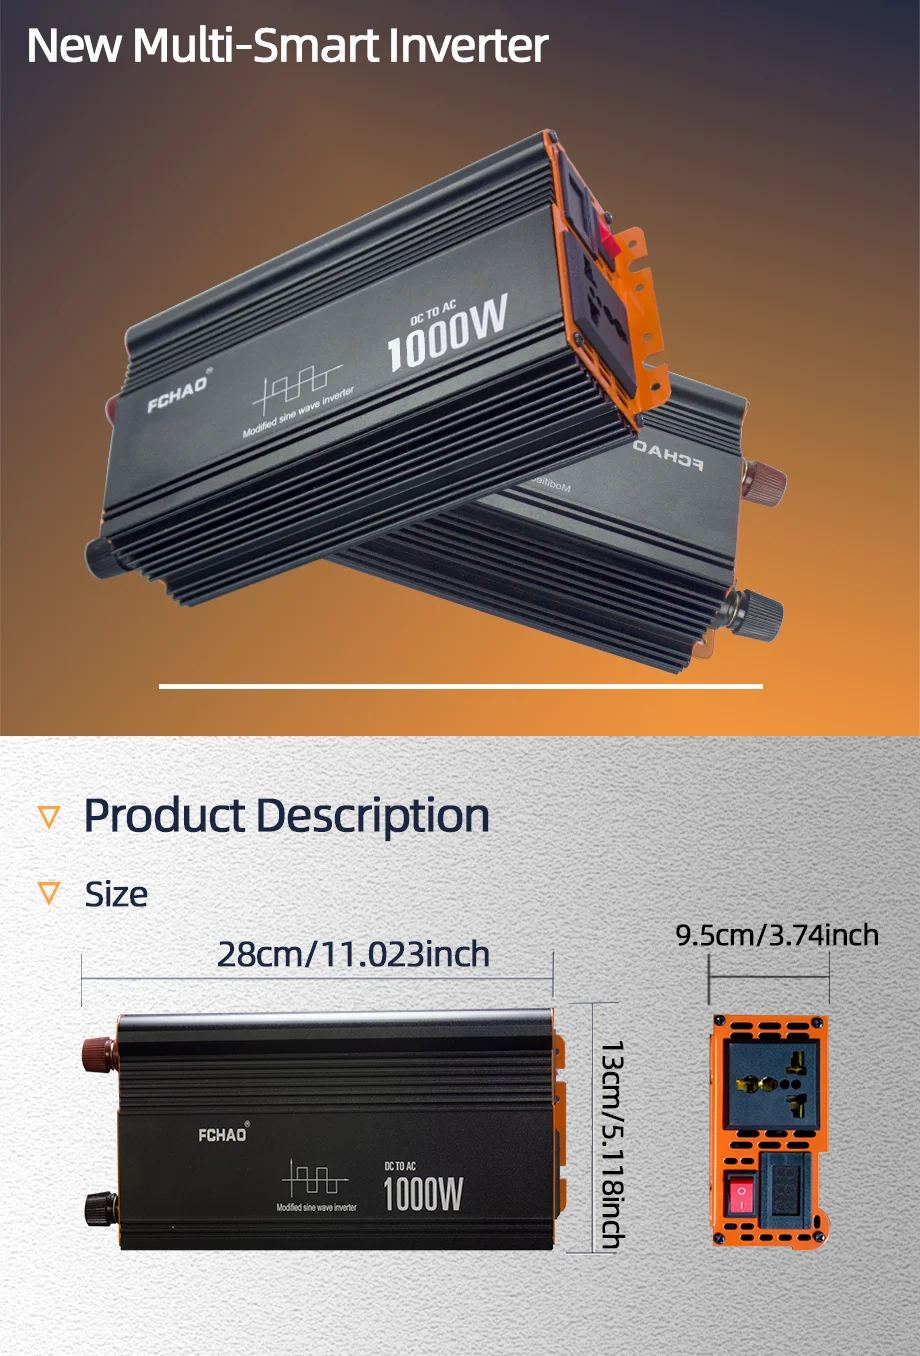 FCHAO 1000W Ups Modified Sine Wave Inverter, Converts DC power to AC power for car accessories, solar panels, and more.